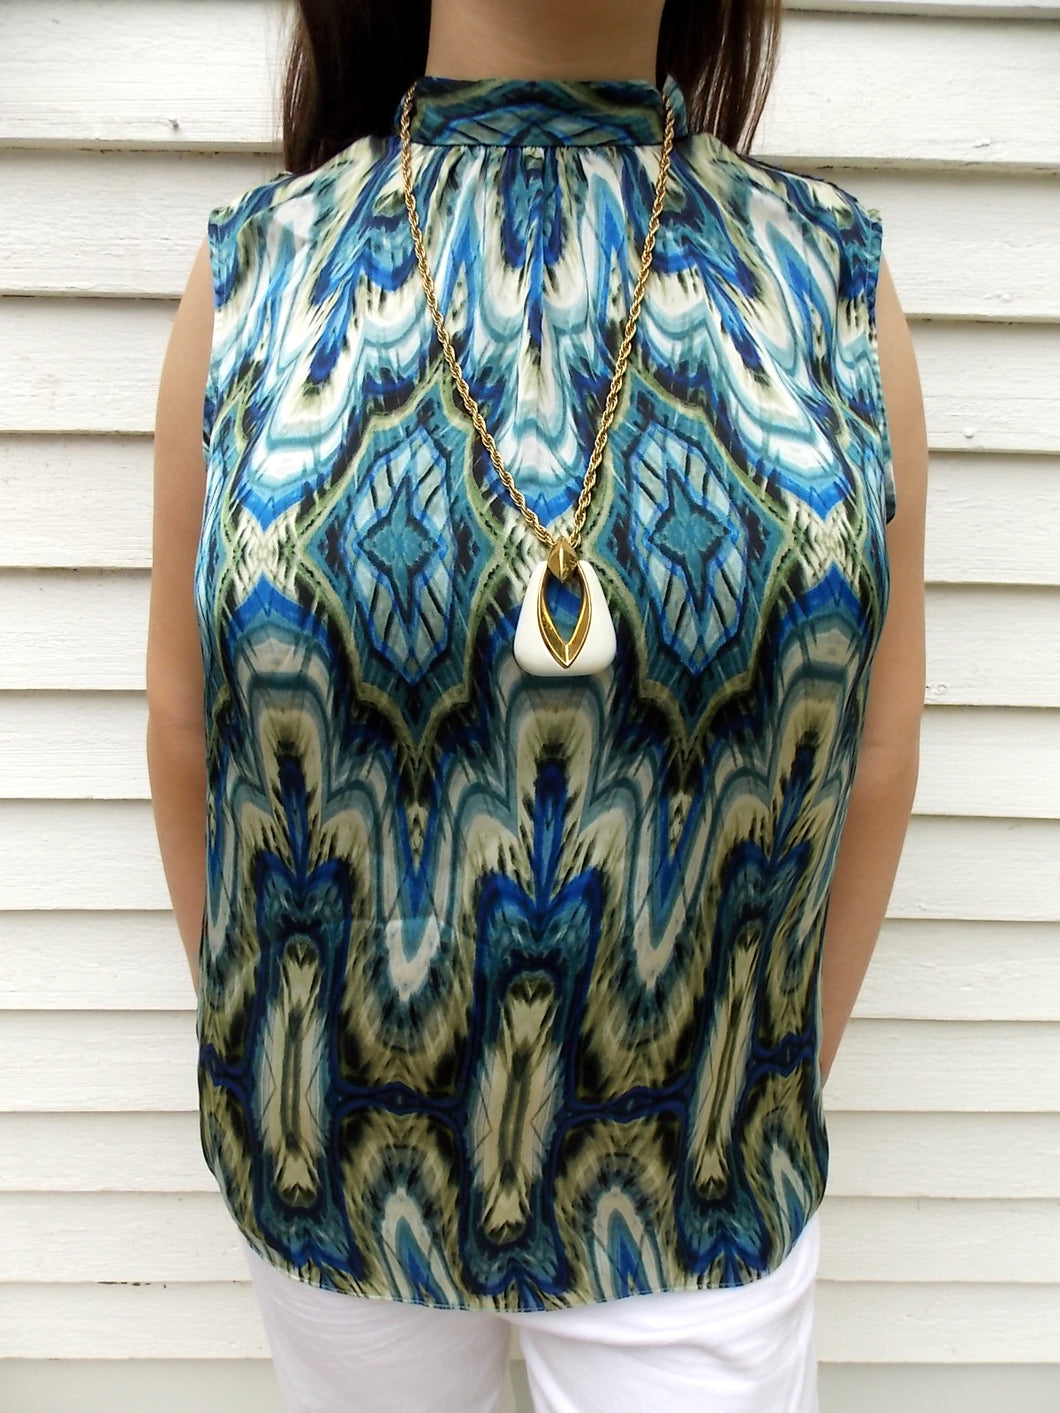 Vince Camuto Abstract Blue's Shell Top Blouse 10 Used